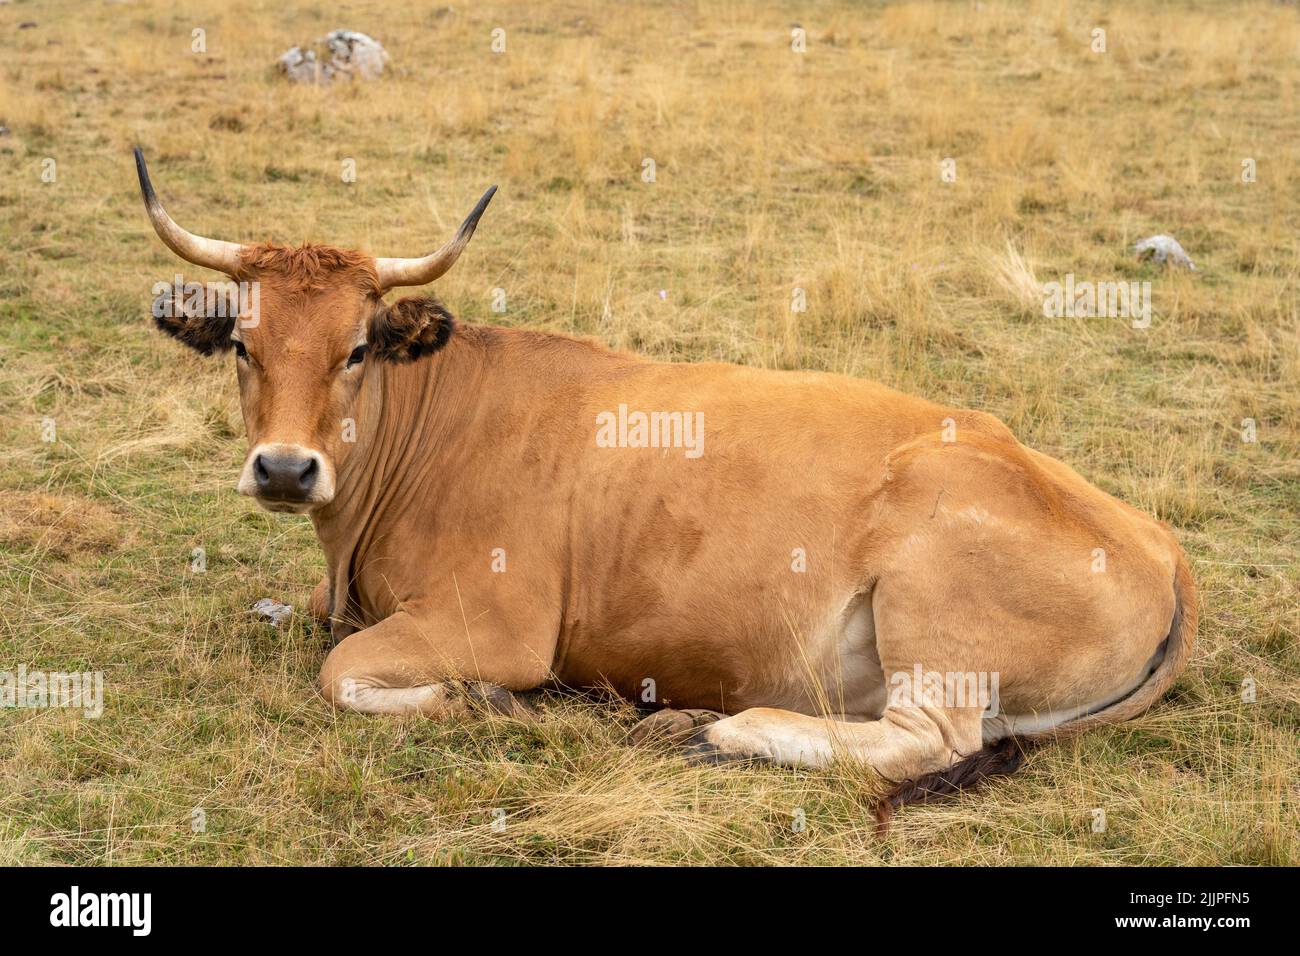 A brown cow sitting in a field during daytime Stock Photo